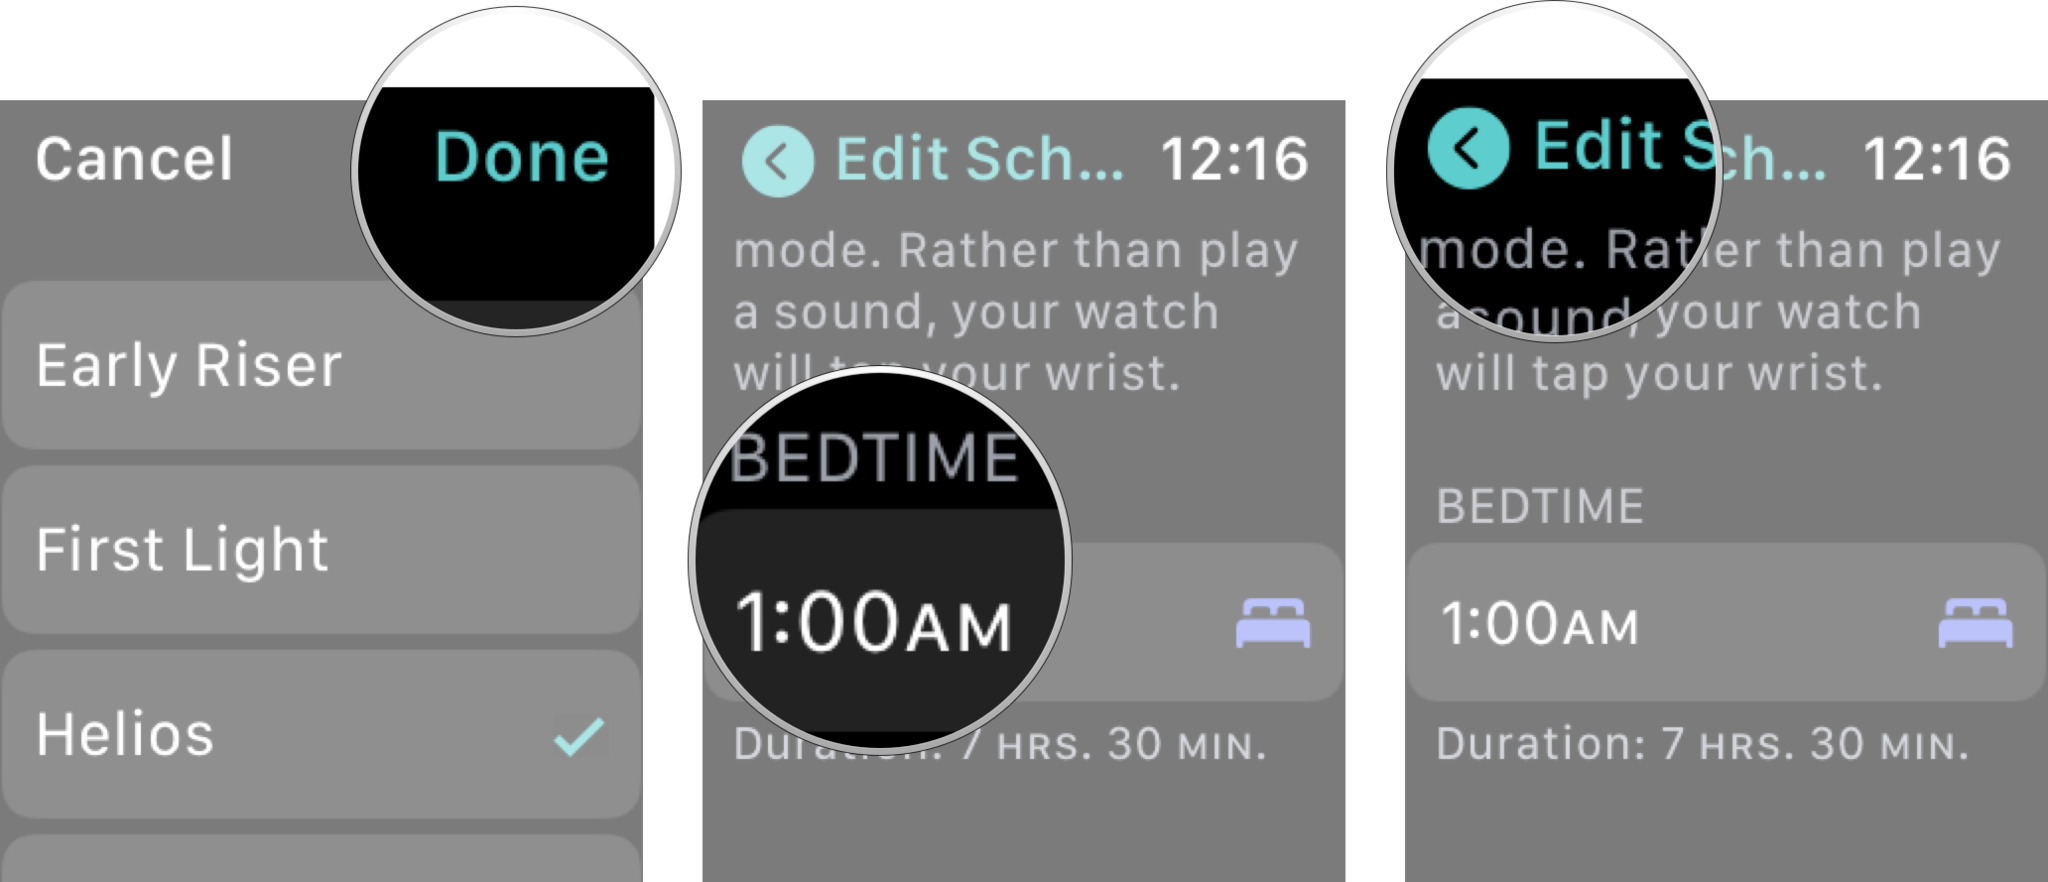 Edit Sleep Schedule In Sleep App On Apple Watch: Tap done, tap the bedtime time to adjust what time you want to go to bed and then tap back. 